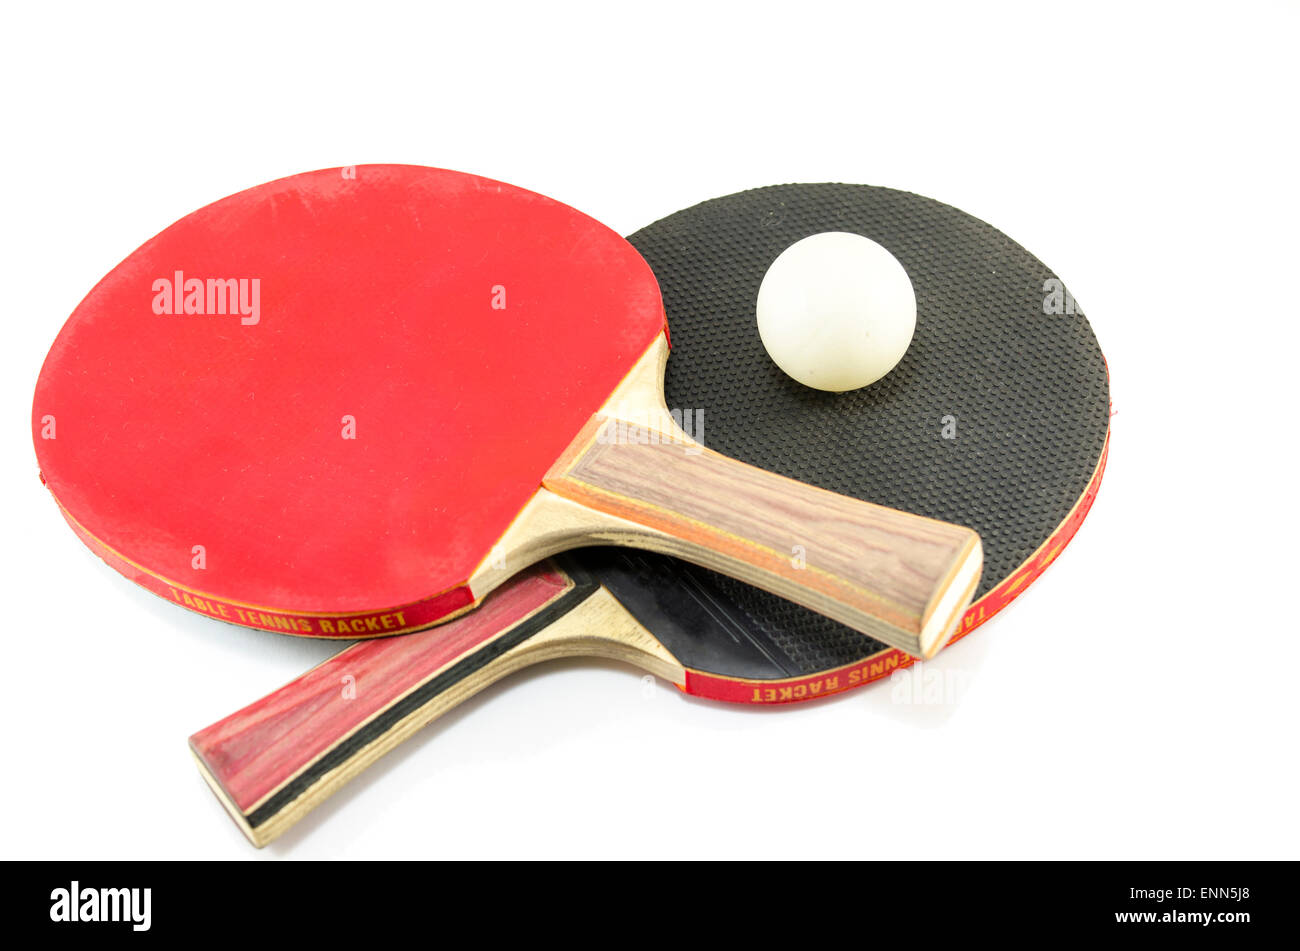 Two ping-pong rackets and a ball isolated on white Stock Photo